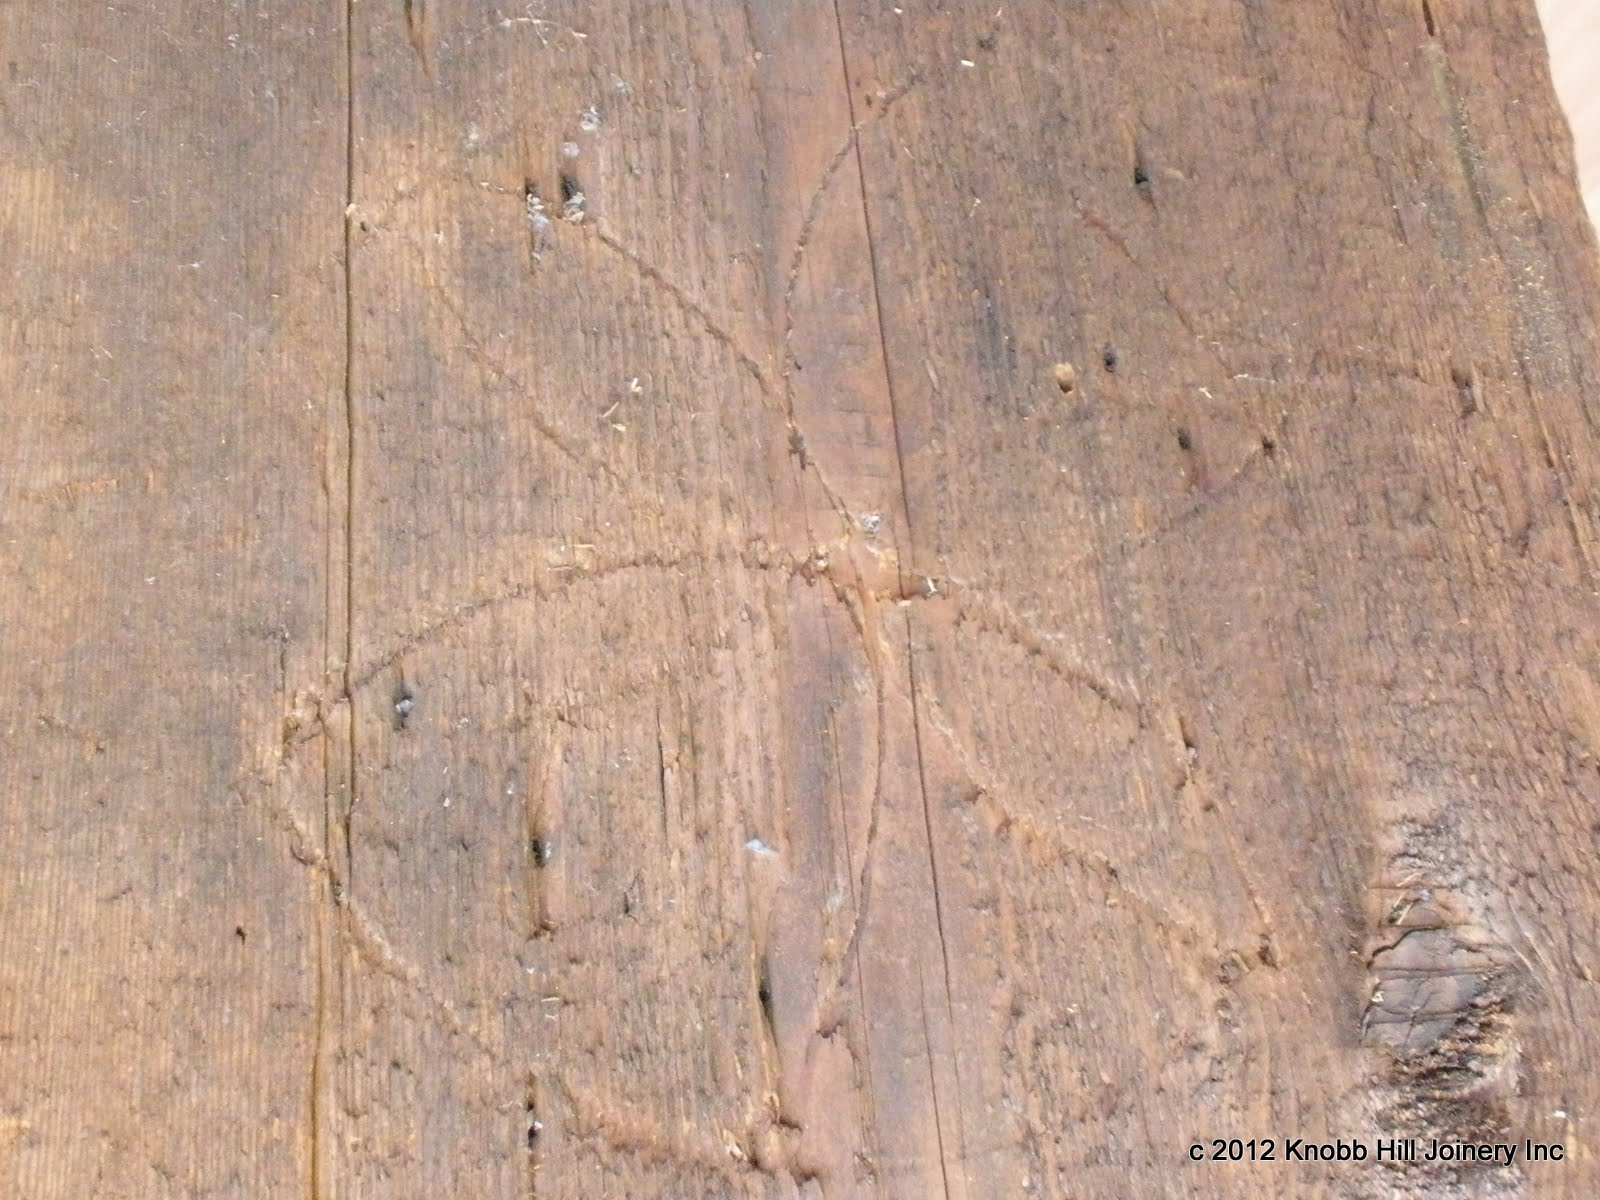 This 'daisy wheel' was discovered in the roof sheathing.